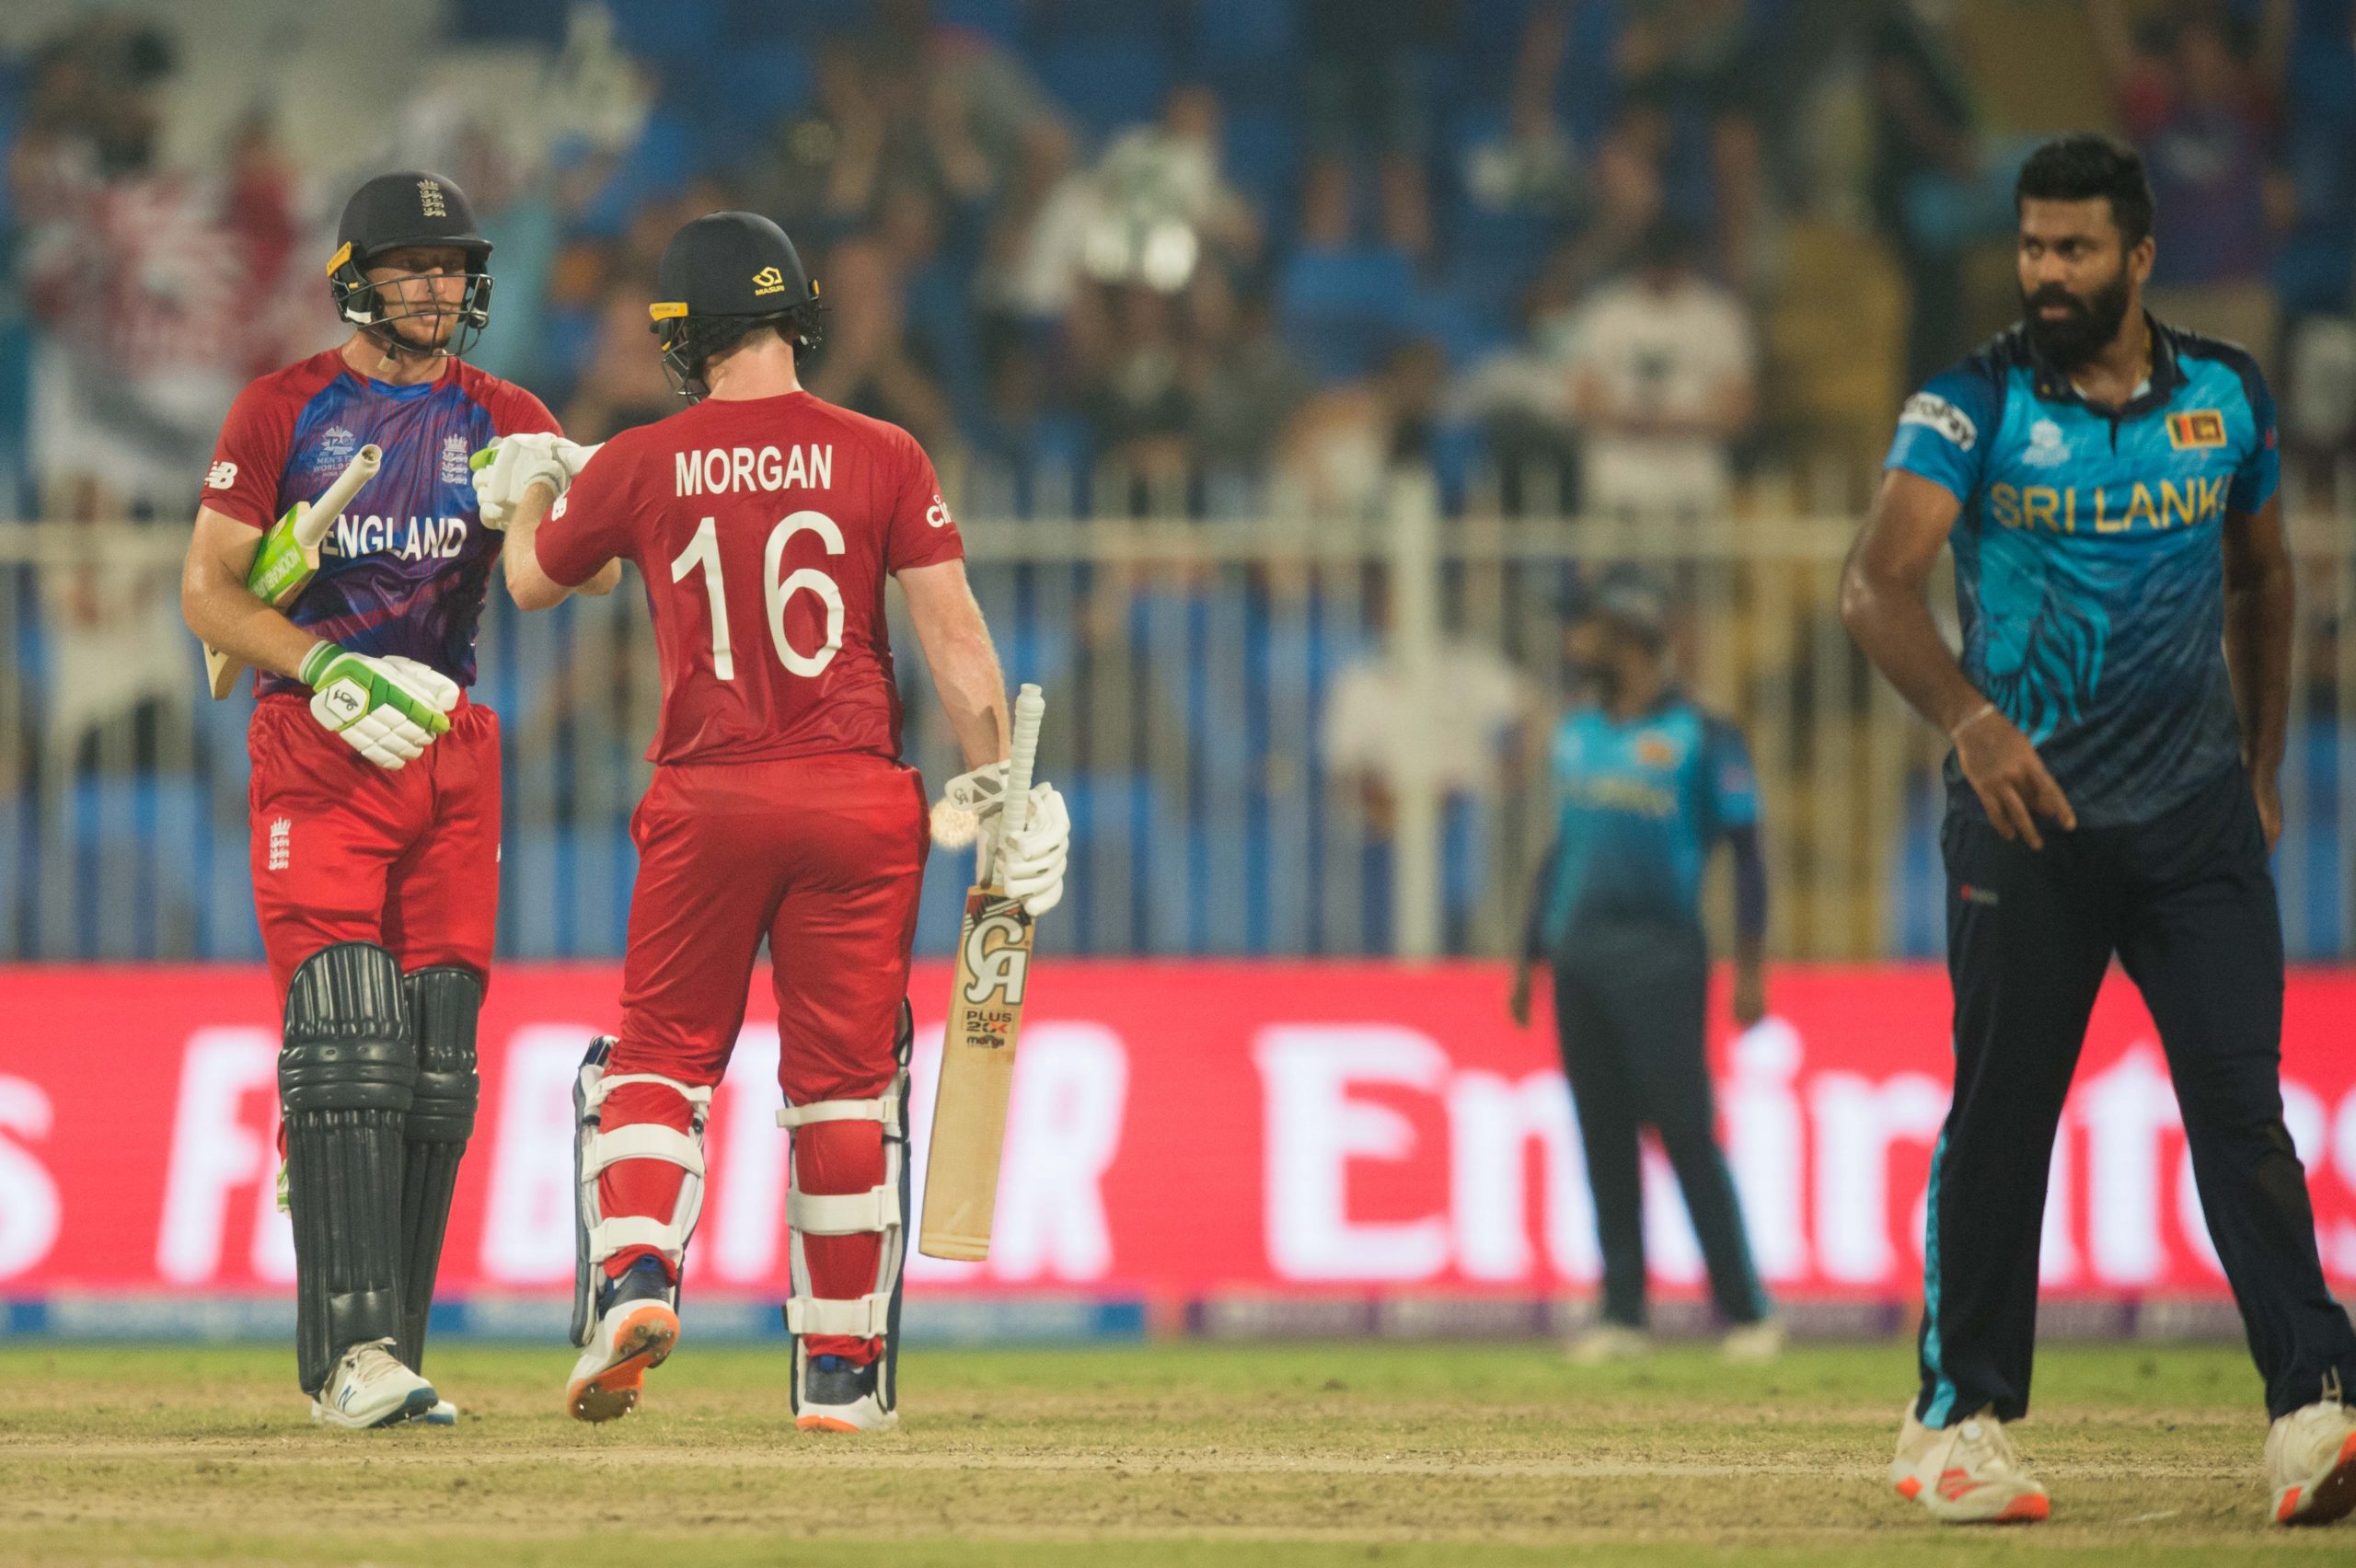 England wins by 26 runs, but not before scared by Sri Lanka